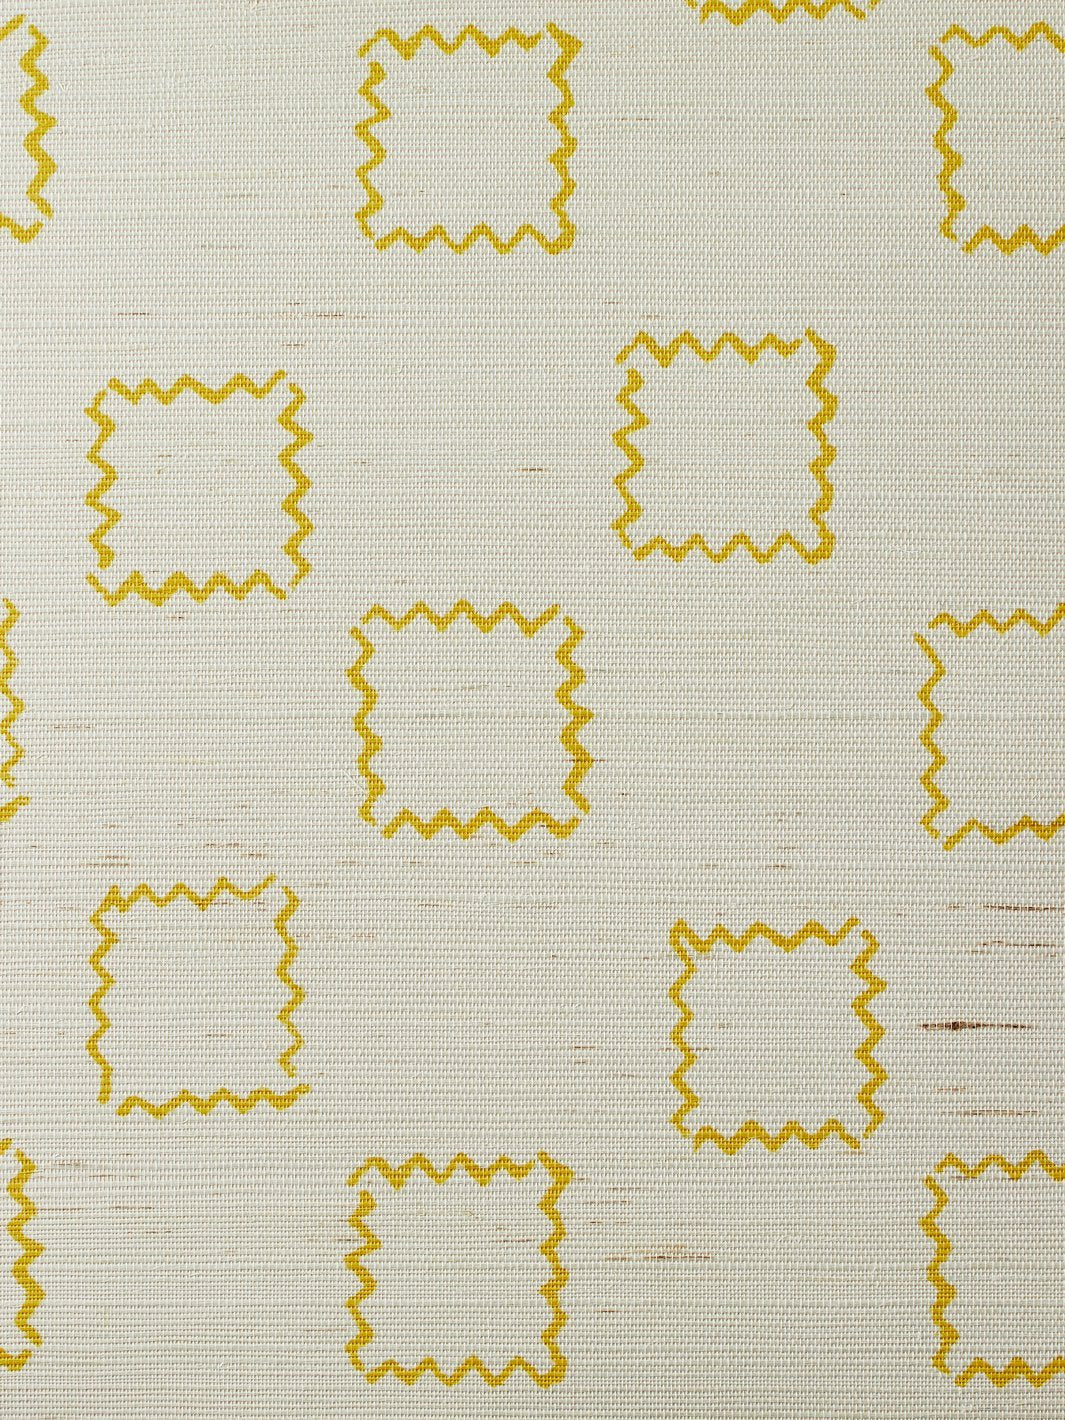 'Zag Square' Grasscloth' Wallpaper by Nathan Turner - Gold